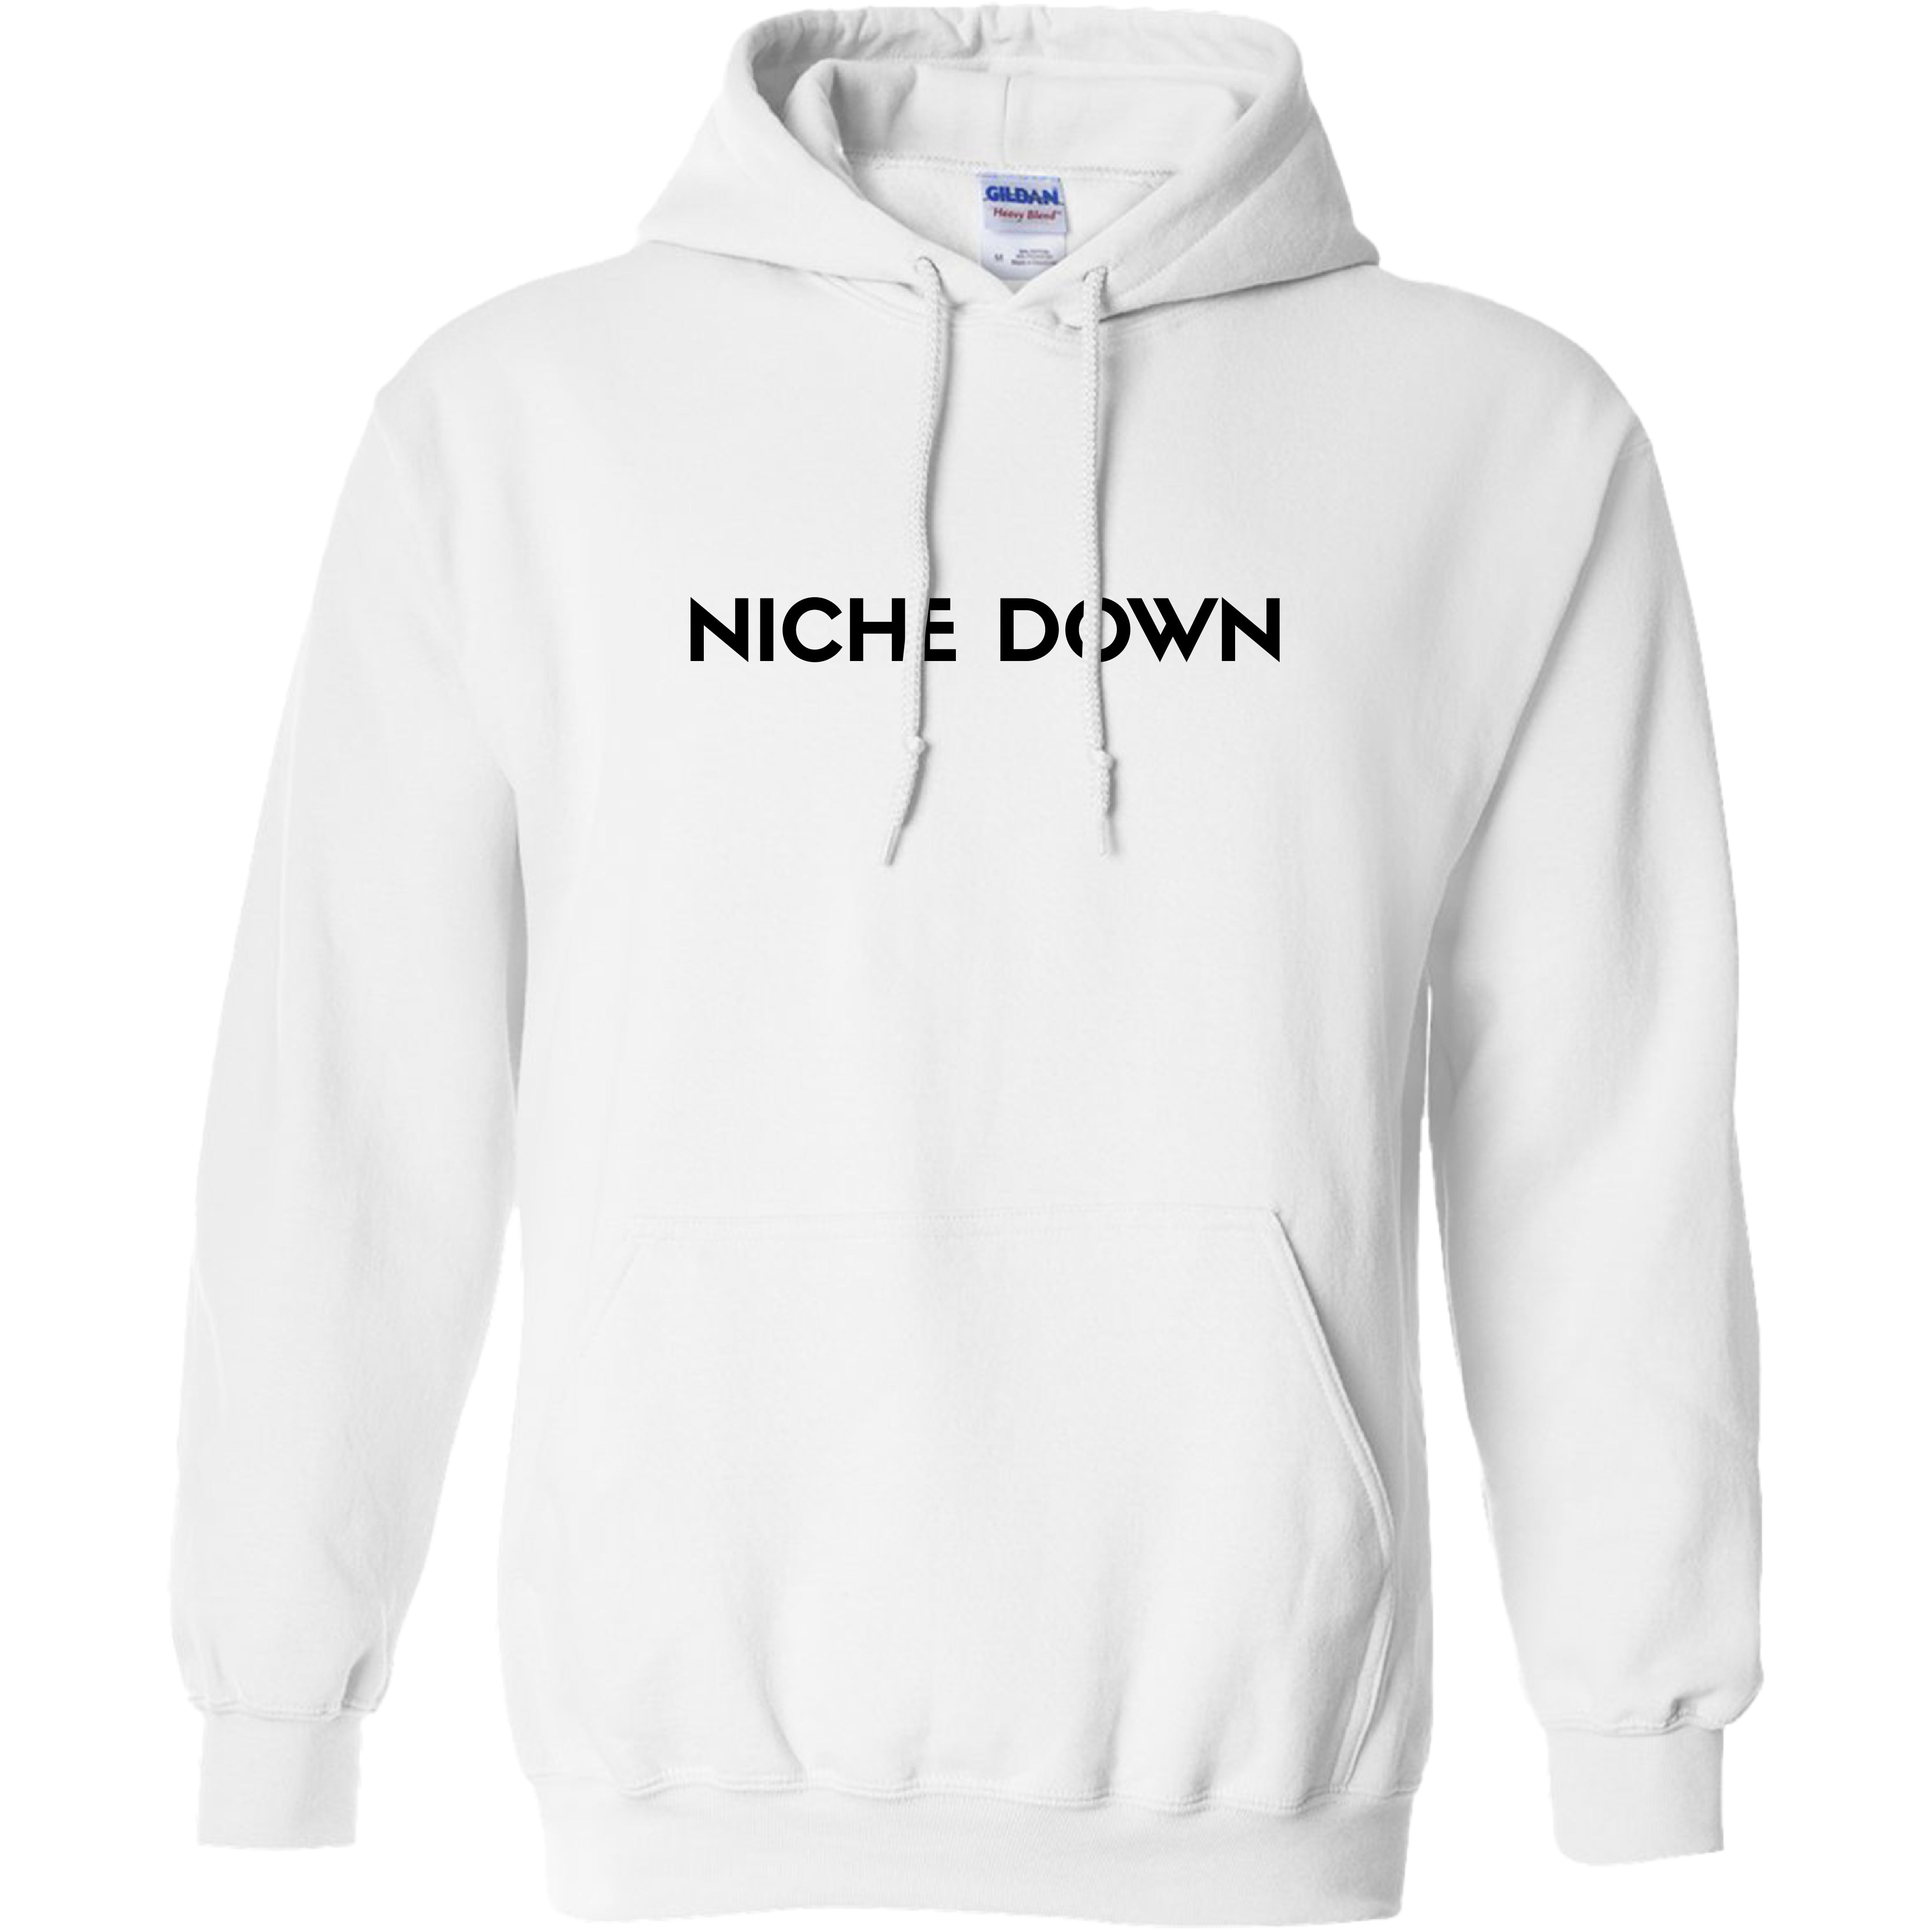 Freelance with Phil - Niche Down Hoodie